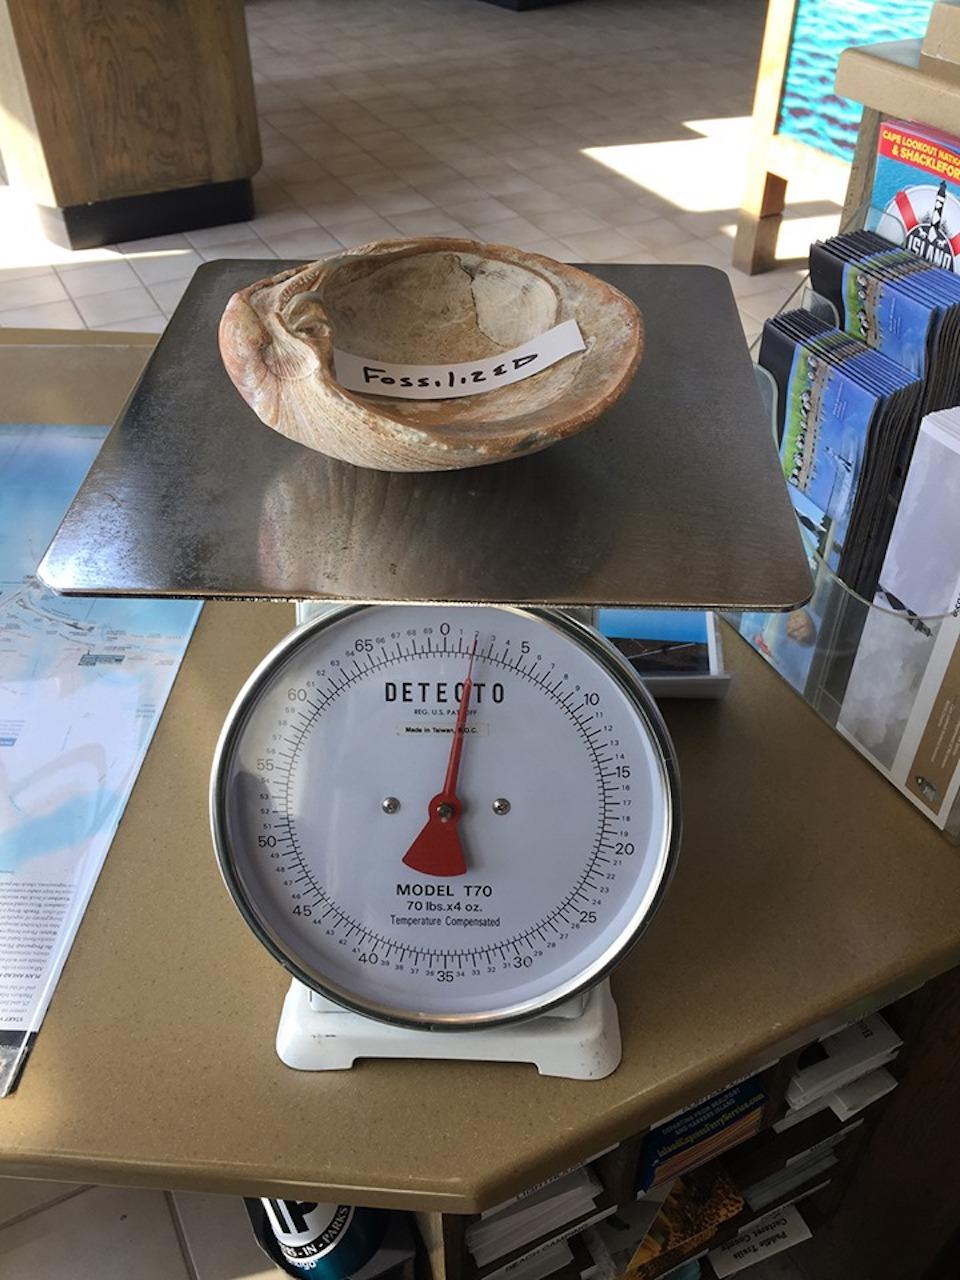 A 2-pound clam shell was tossed onto Cape Lookout National Seashore's beach by Hurricane Dorian/NPS